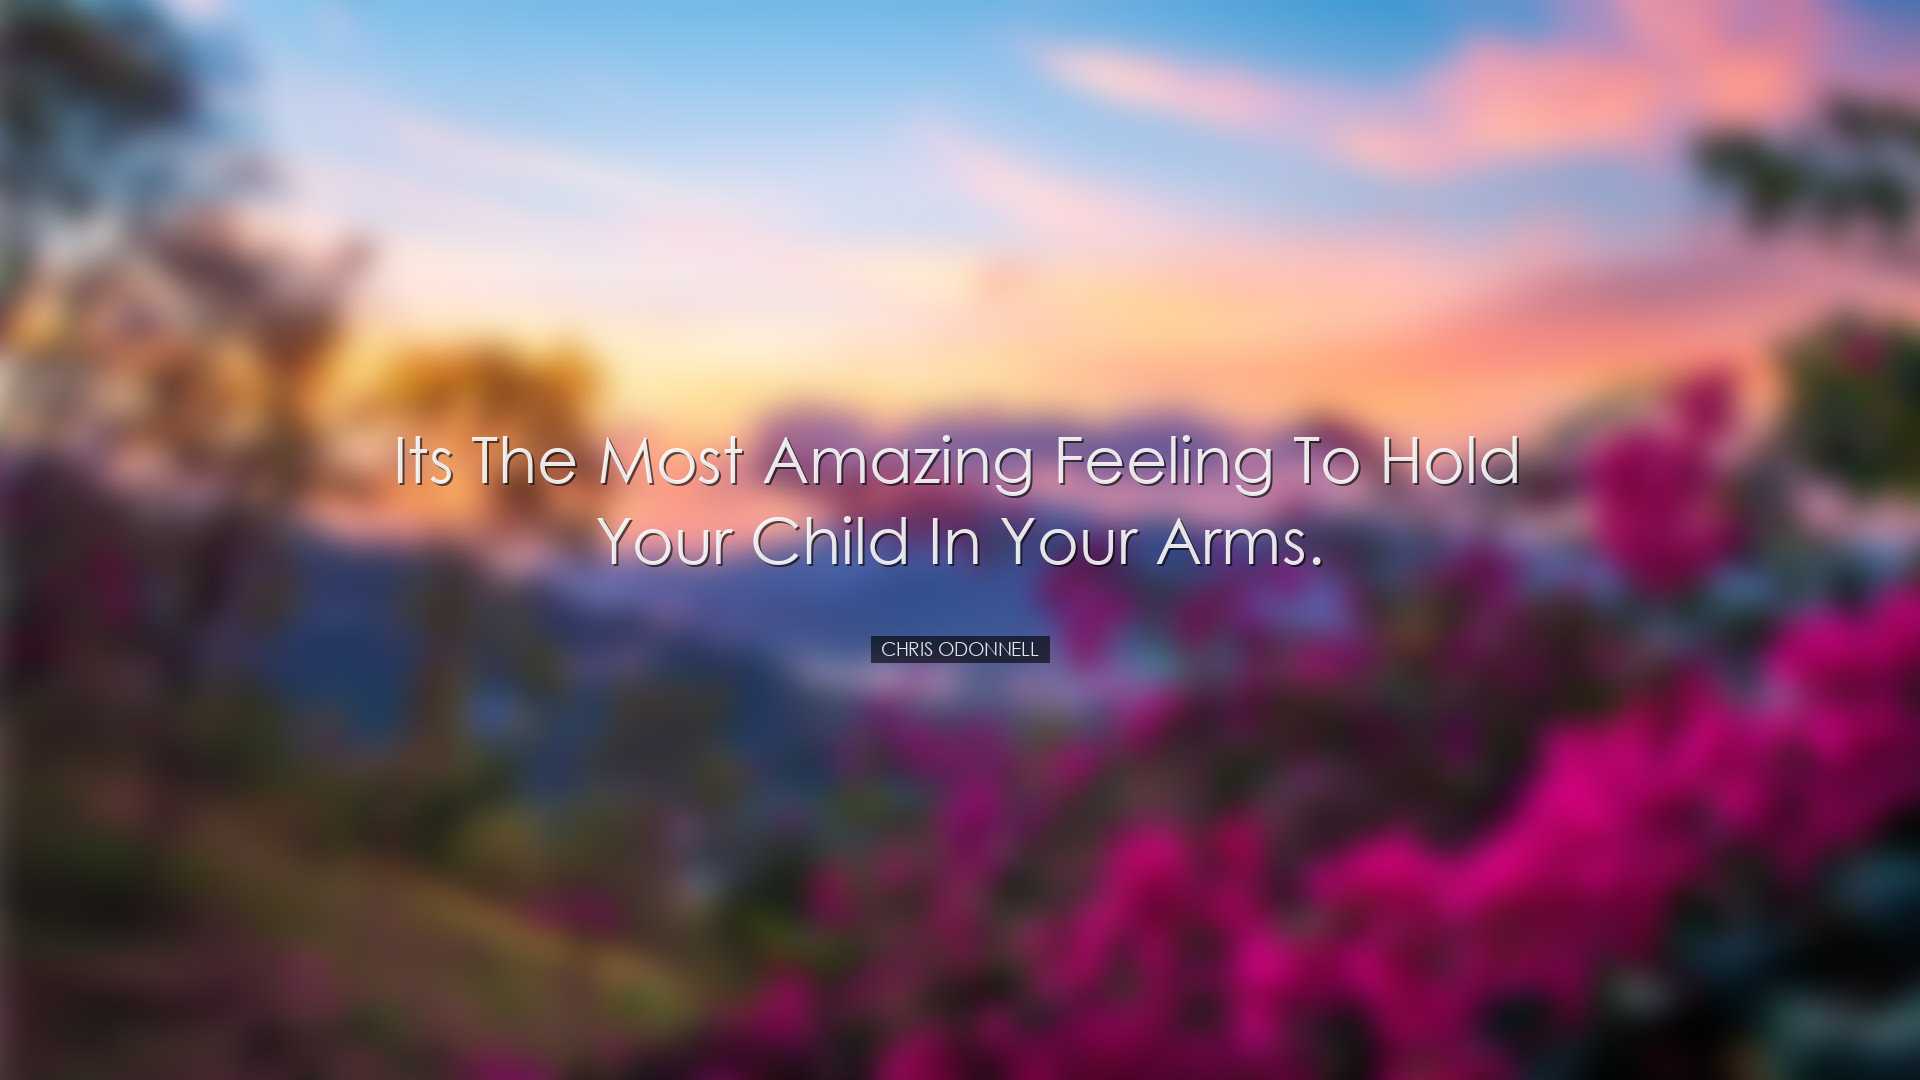 Its the most amazing feeling to hold your child in your arms. - Ch